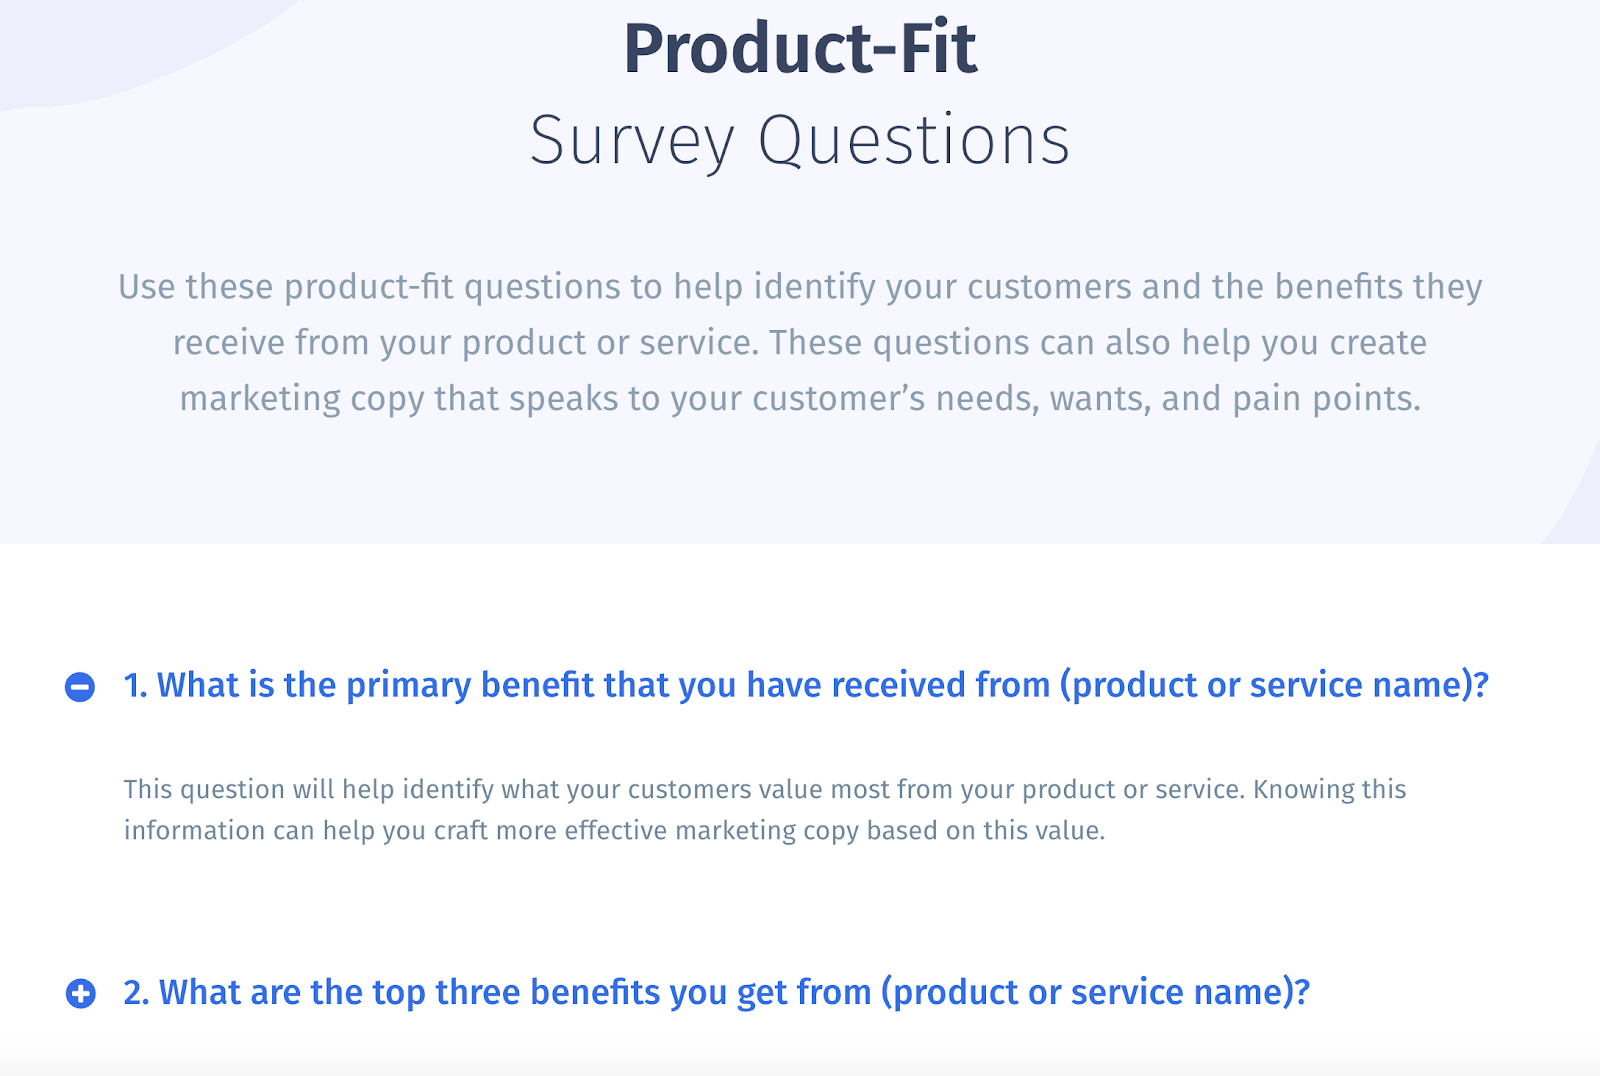 Product-Fit Survey Questions - Use these questions to identify your customers